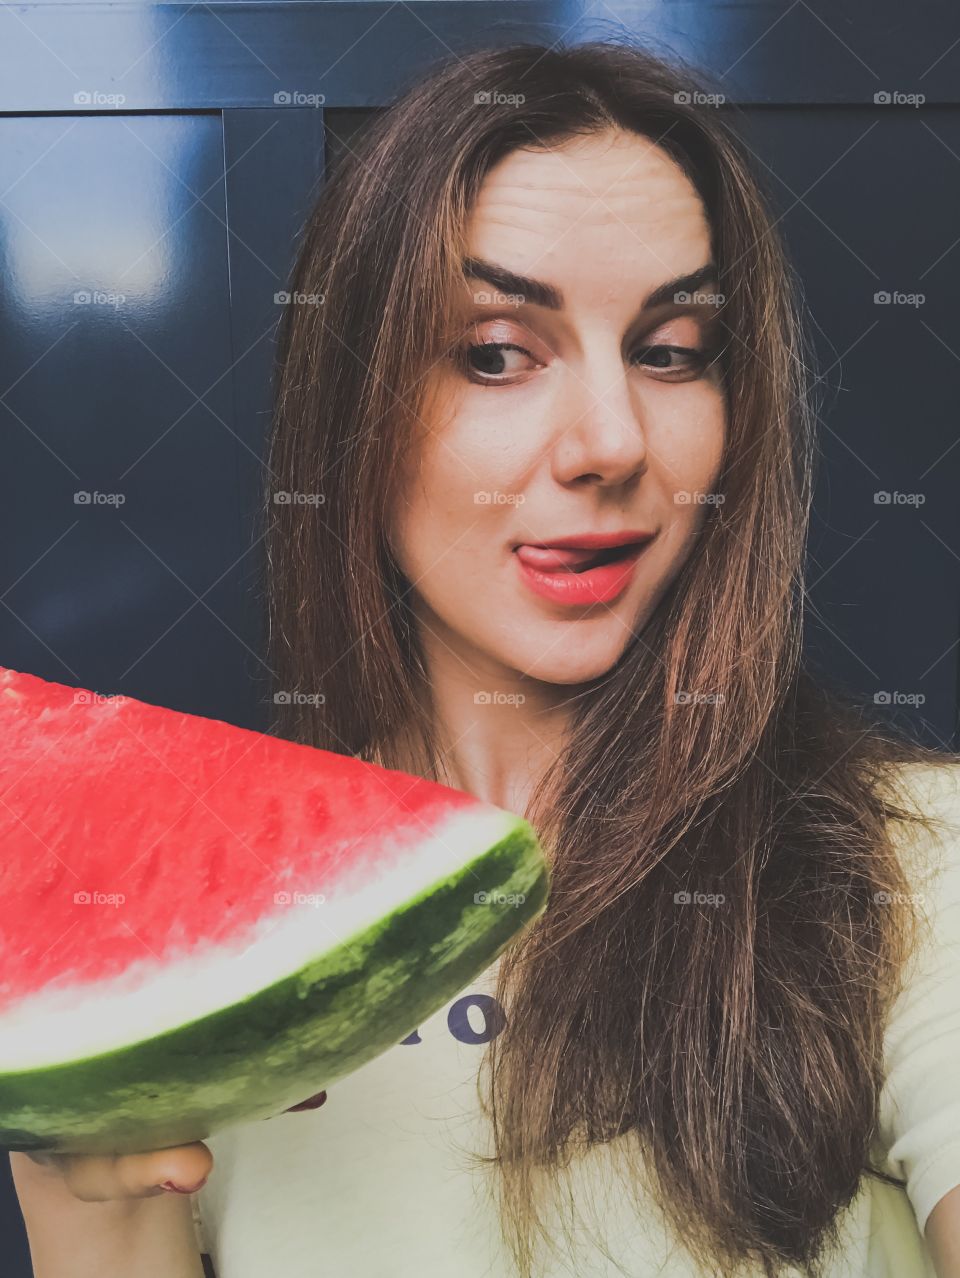 Summertime watermelon time. A girl with watermelon 